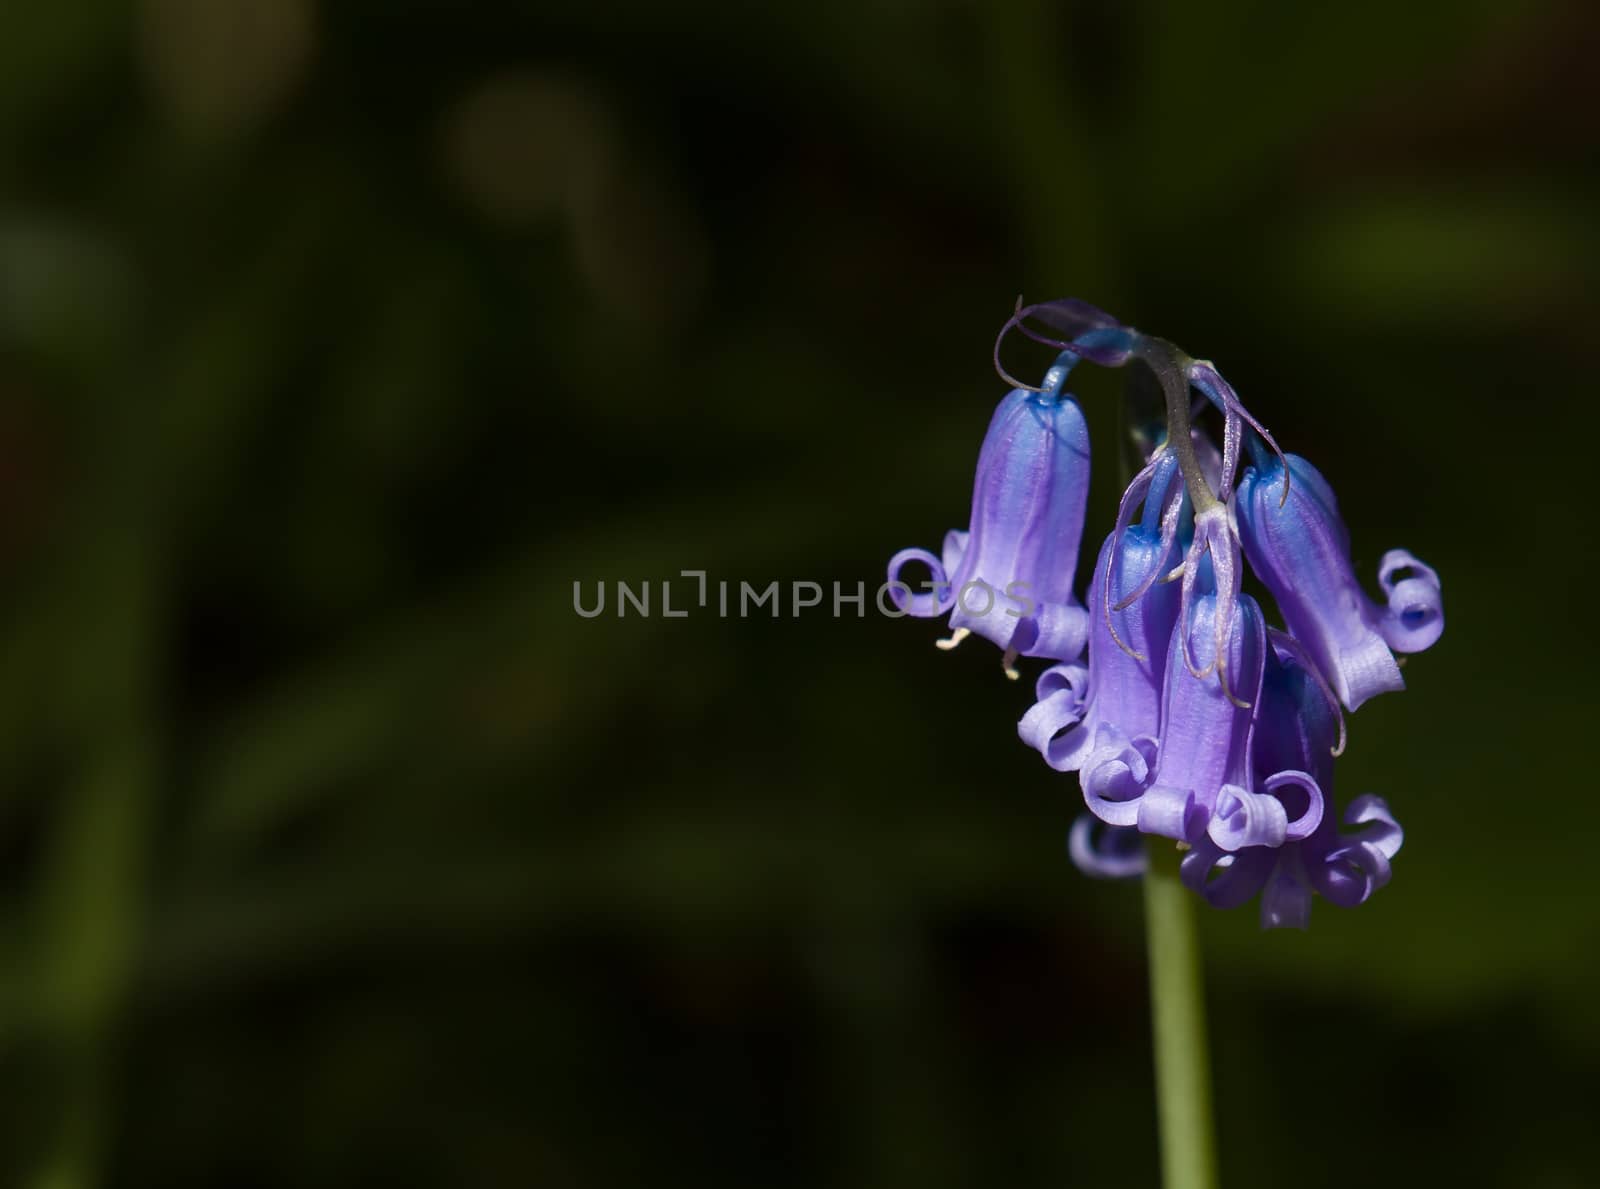 Close-up detail of Common Bluebell, native to Great Britain and Europe